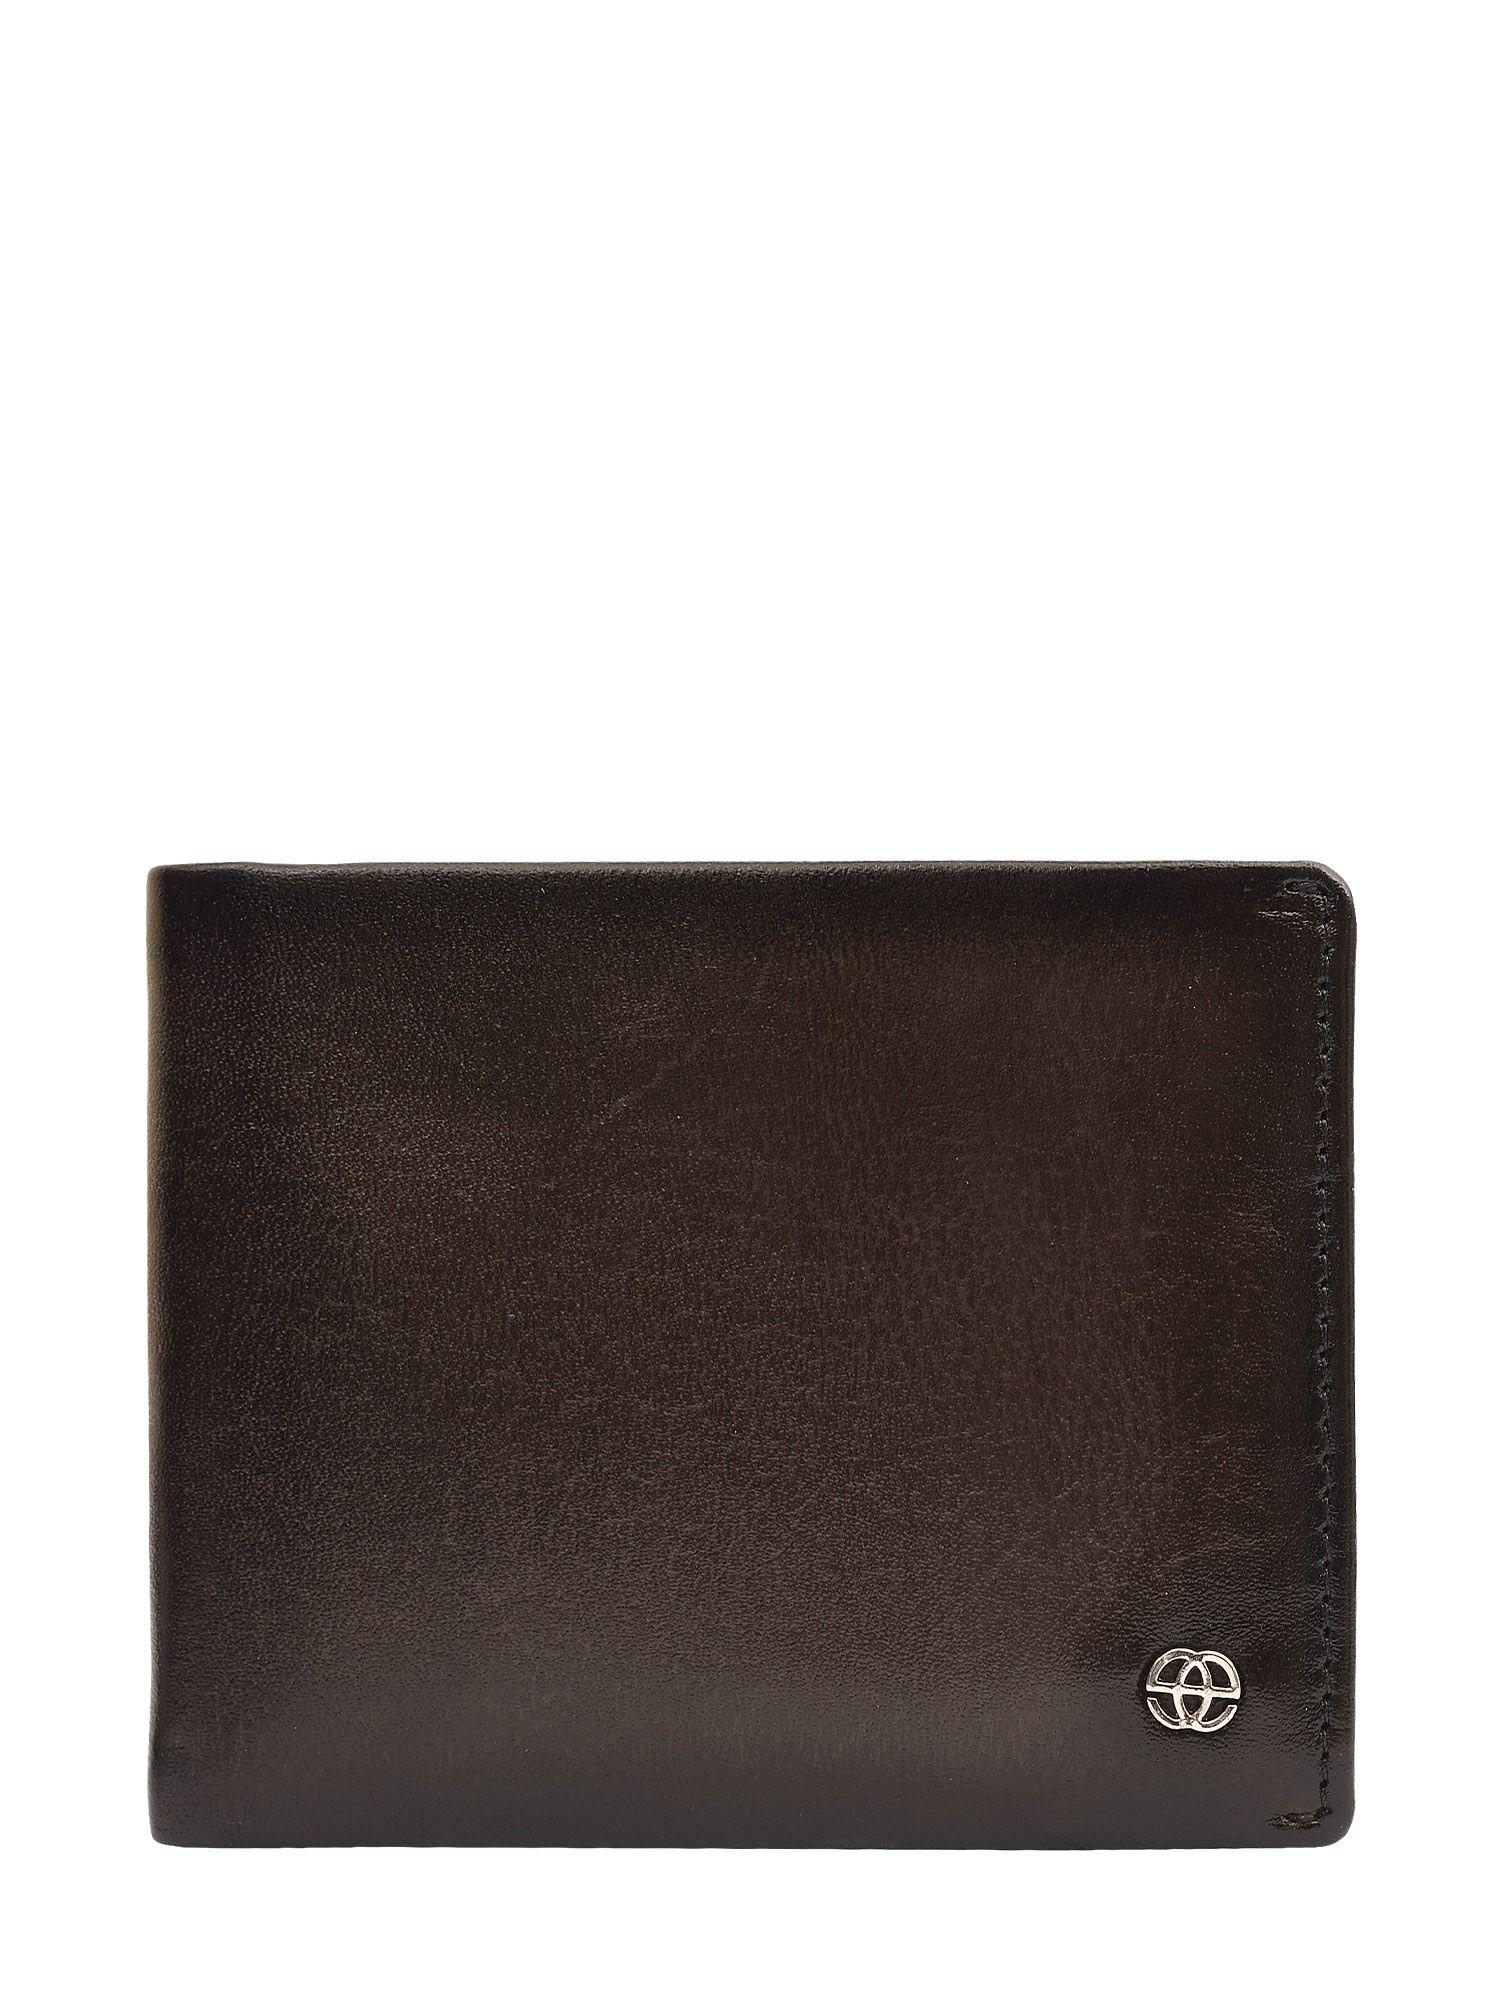 arno two fold wallet for men, 5 card holders, brown hand-stitched